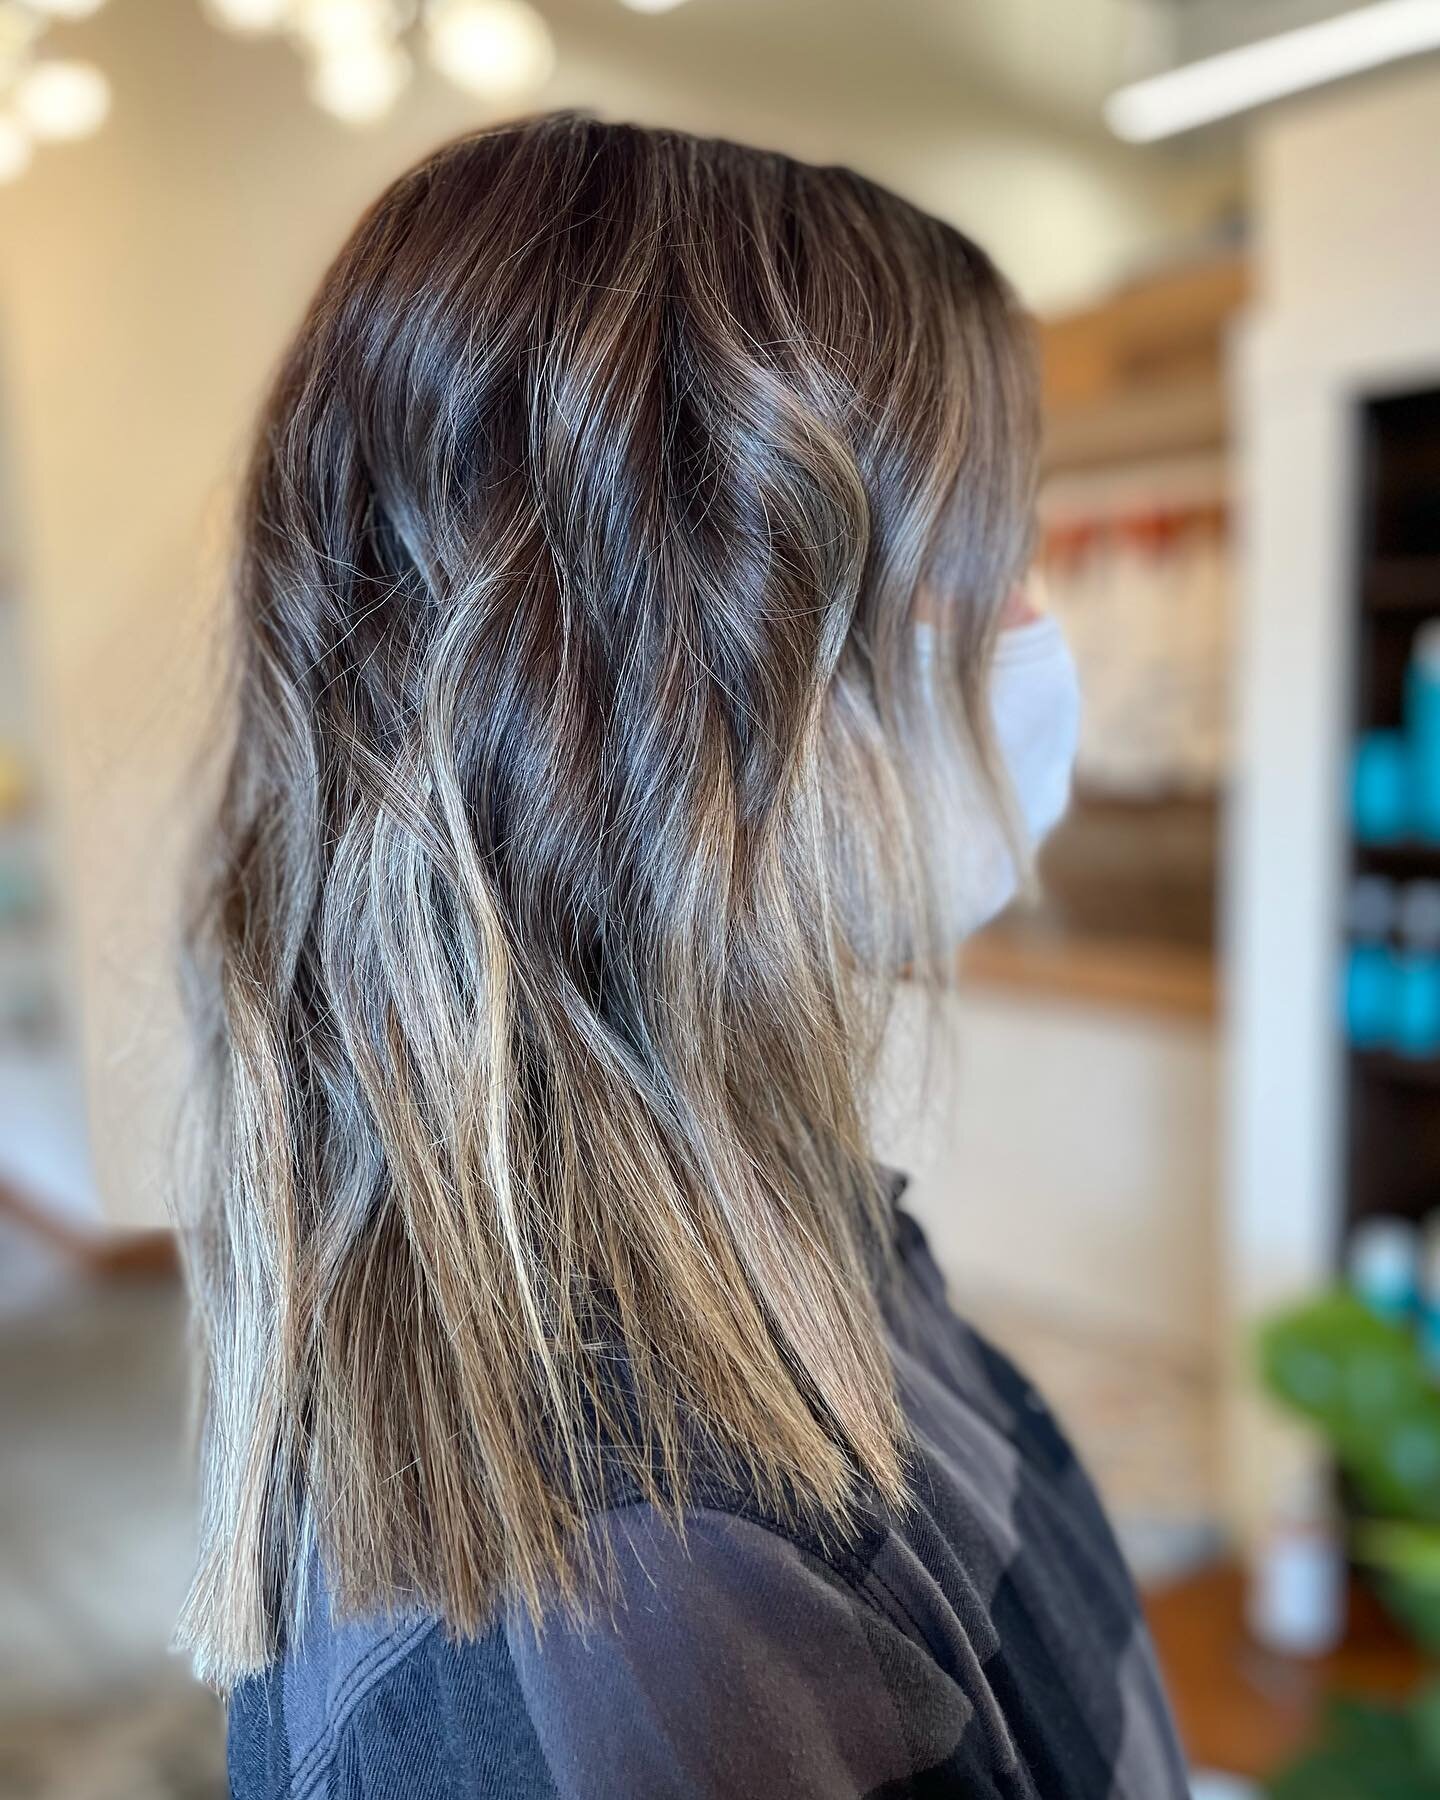 The perfect fall bronde
.
.
Text or DM me to book an appointment!
.
.
503.560.6363
.
.
#hairbyruthstrauss #coteriesalonpdx #portlandhairstylist #pdxhairstylist #behindthechair #balayage #balayagist #bestofbalayage